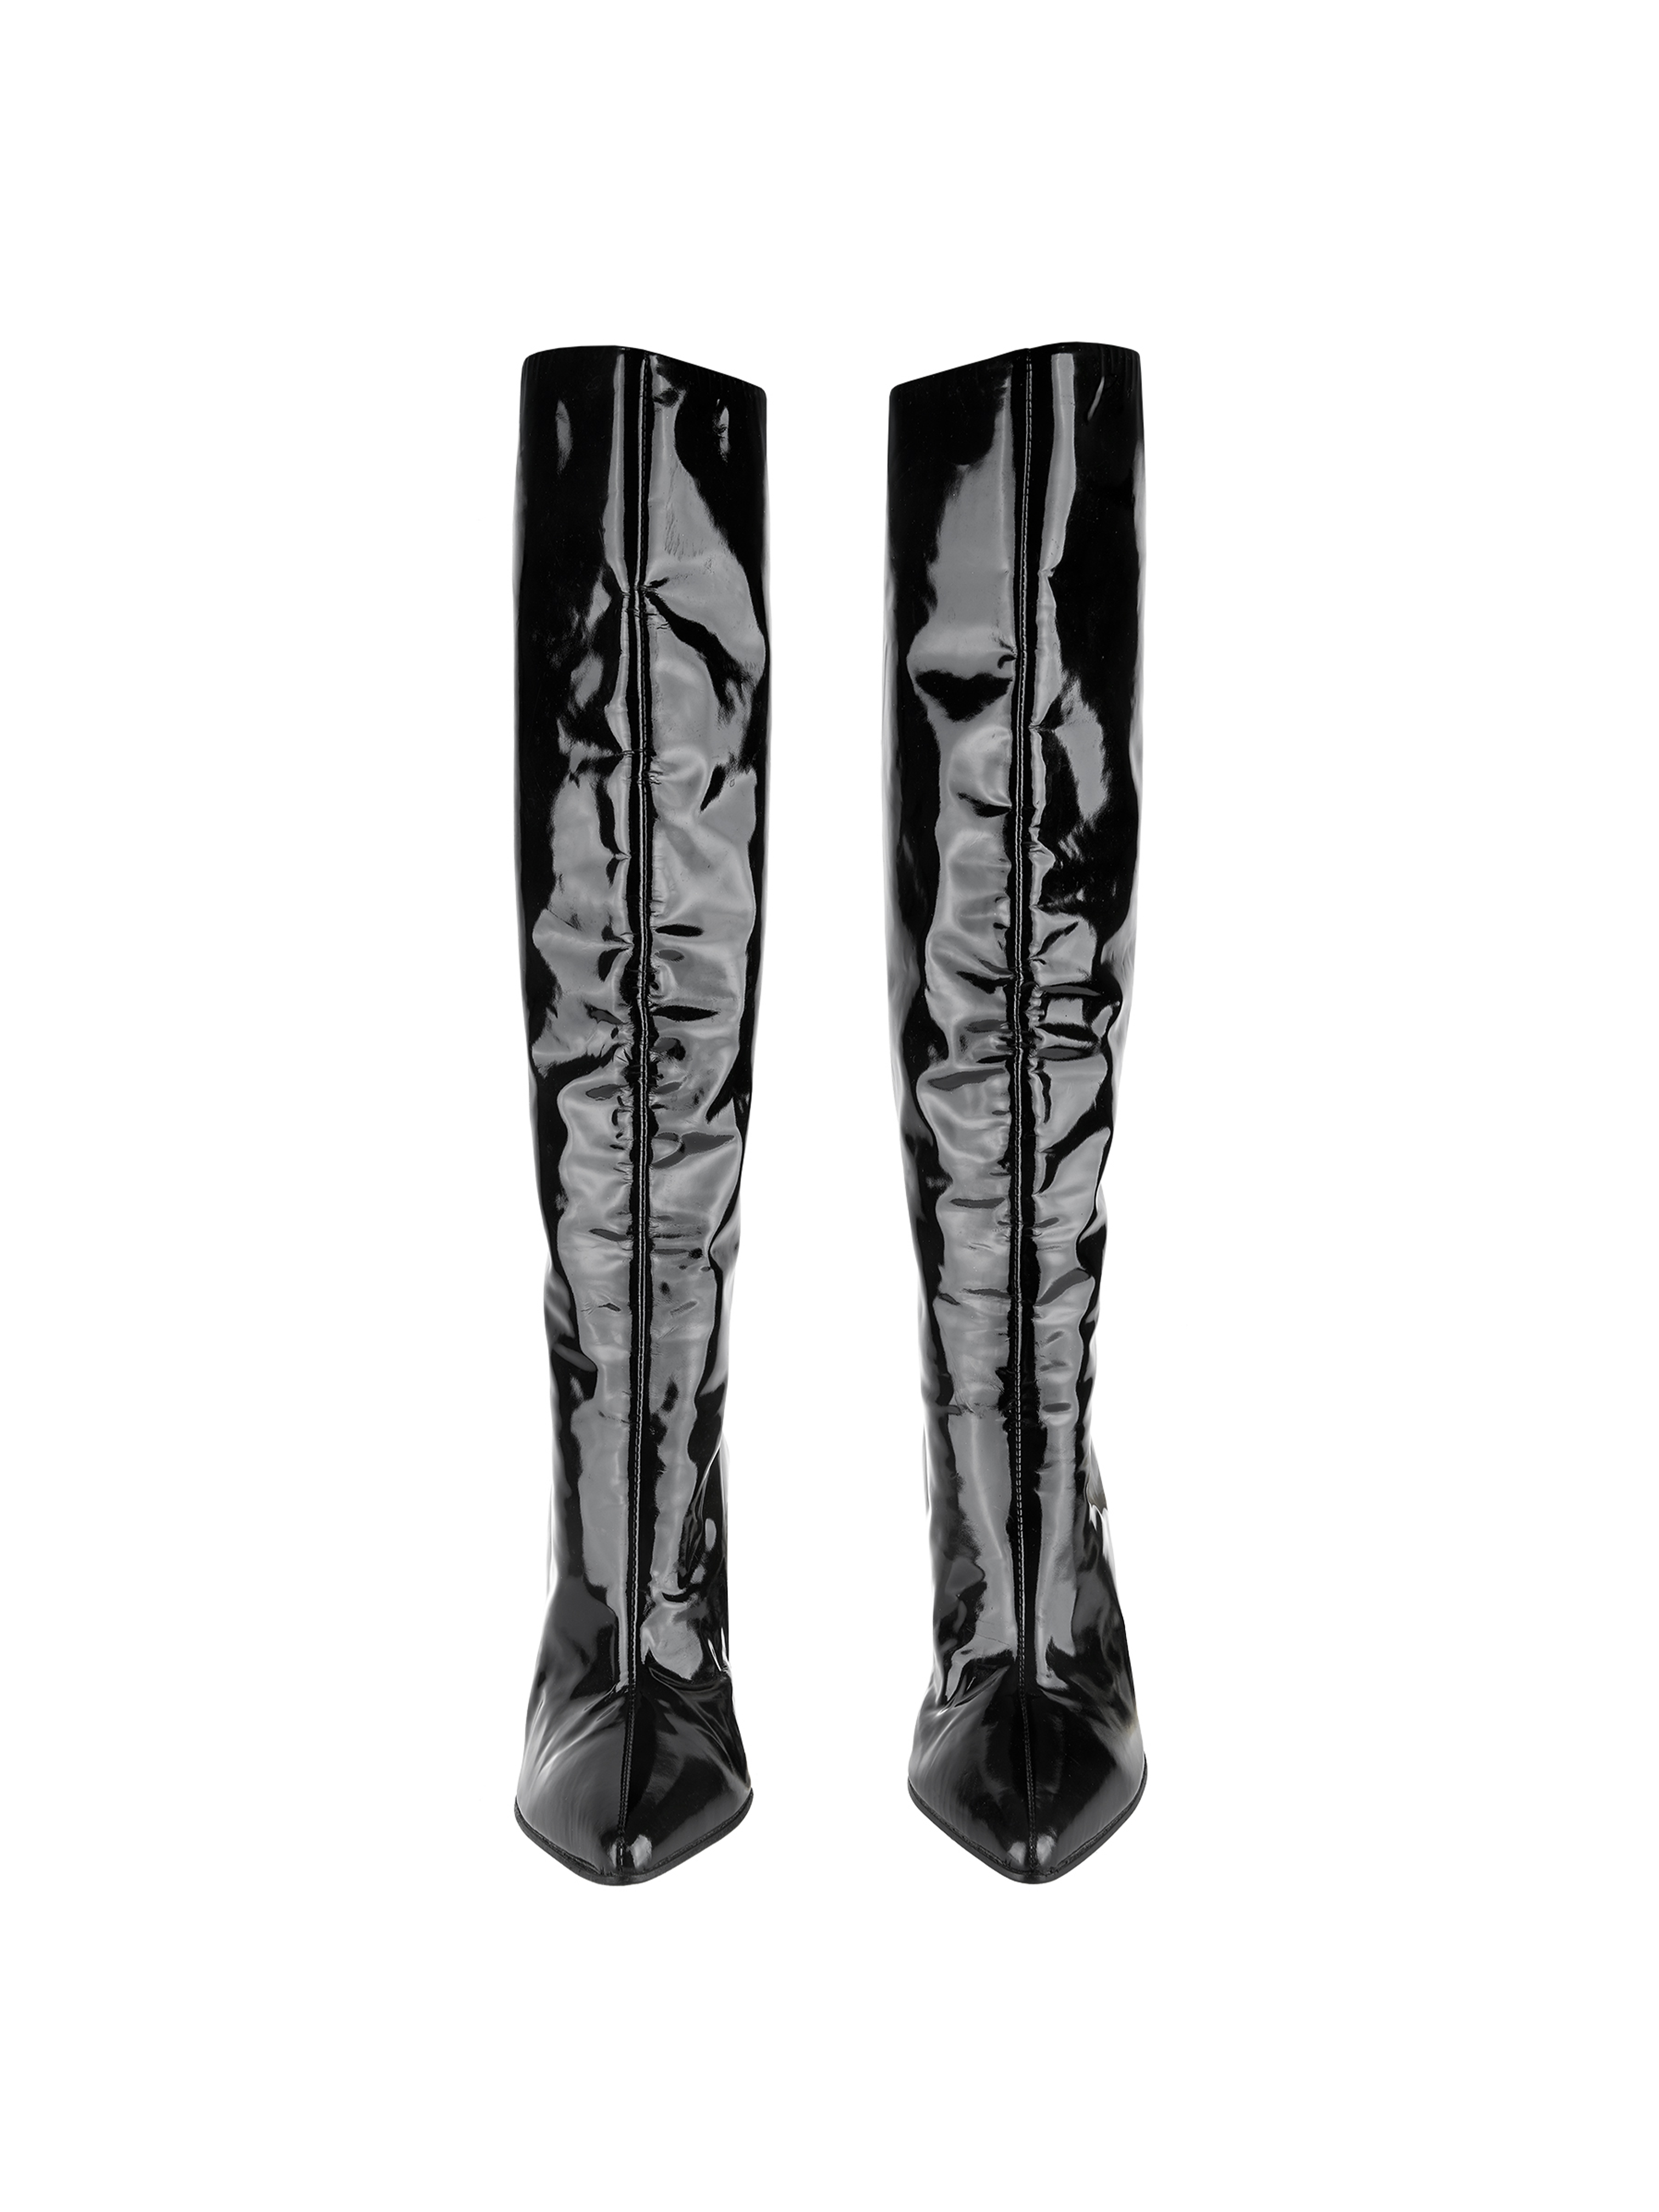 Gucci by Tom Ford Fall-Winter 1997 Black Patent Leather Boots